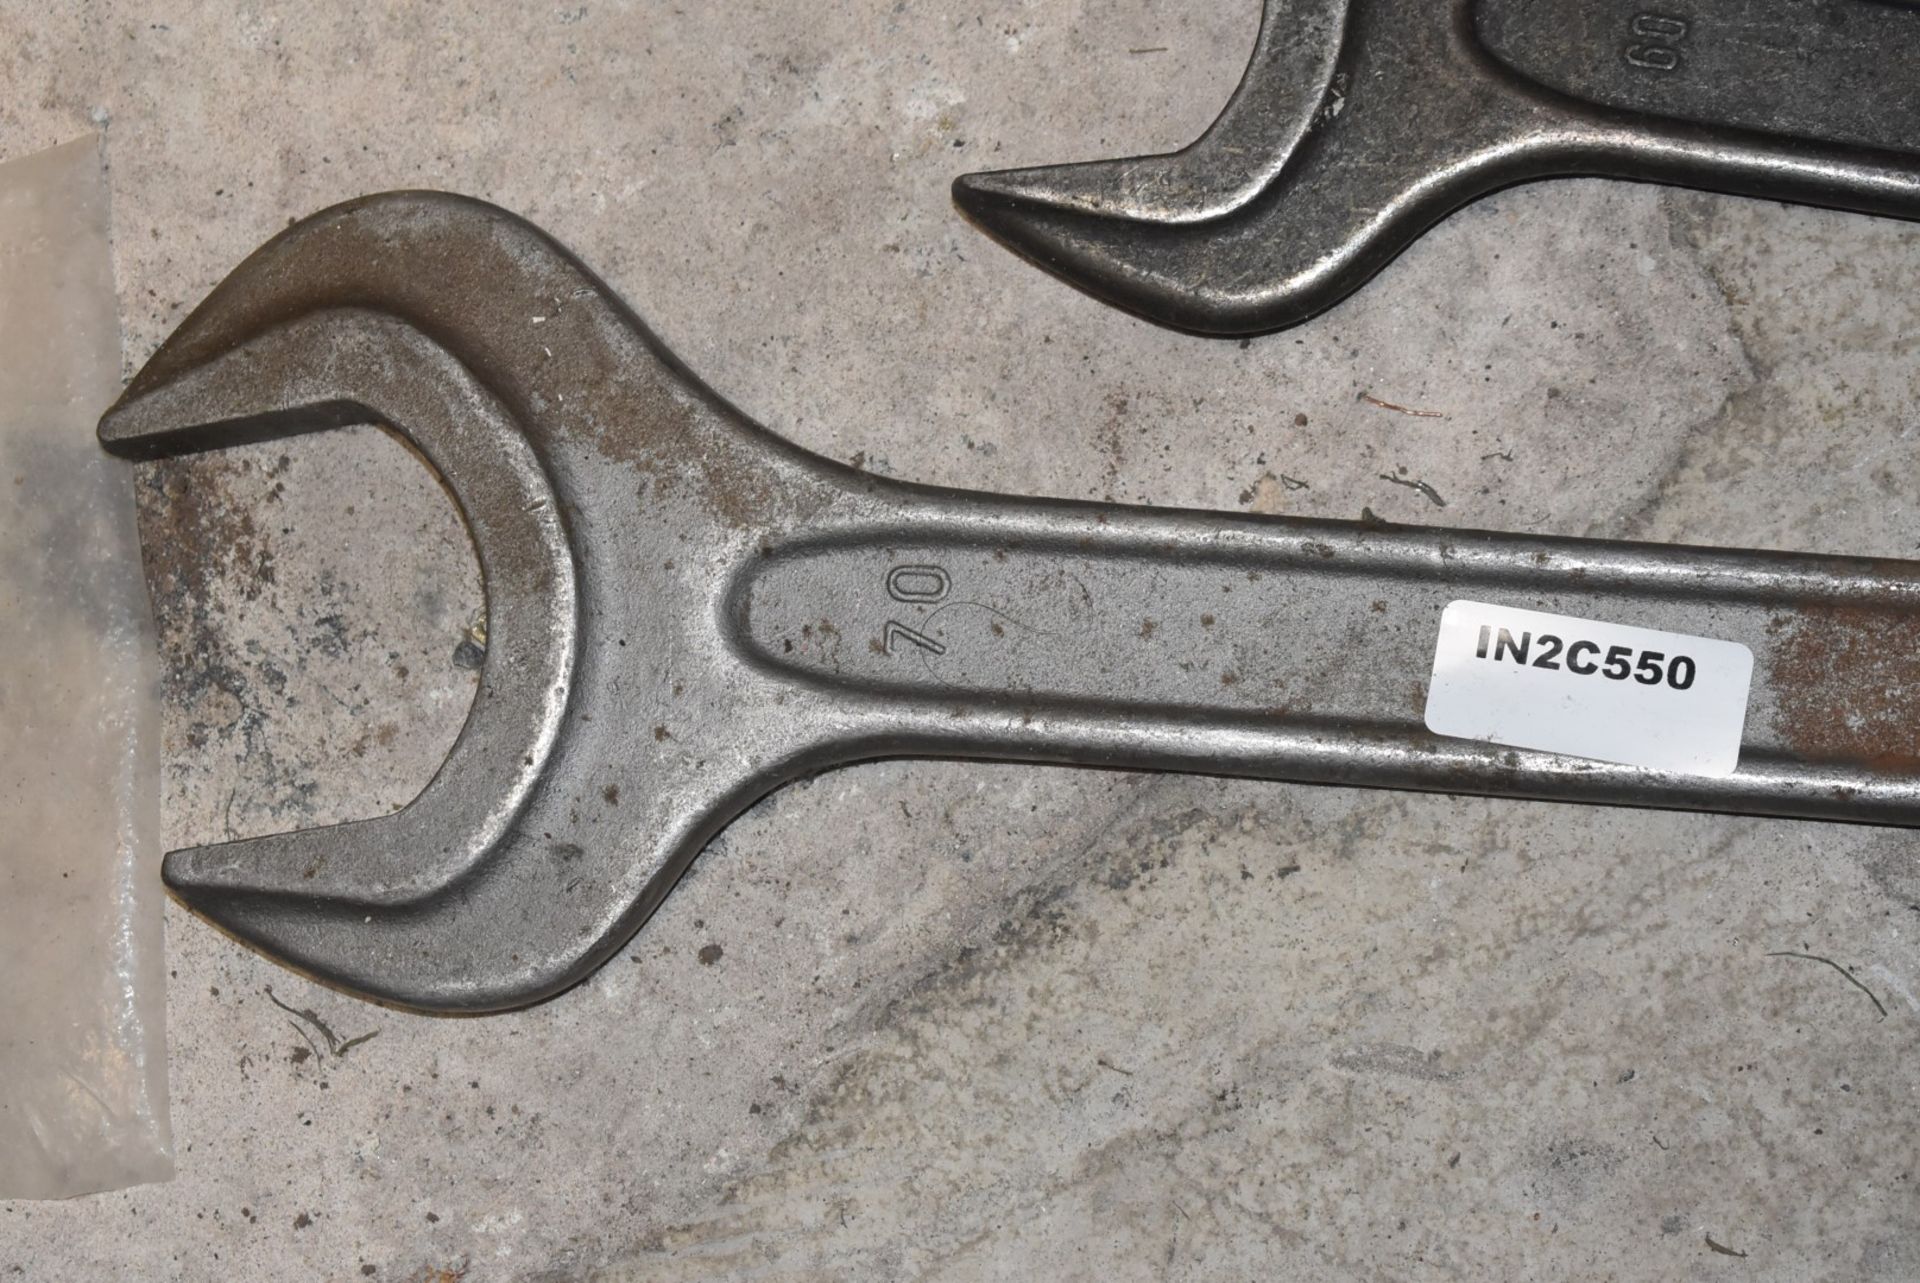 3 x Large Industrial Spanners - Image 6 of 6